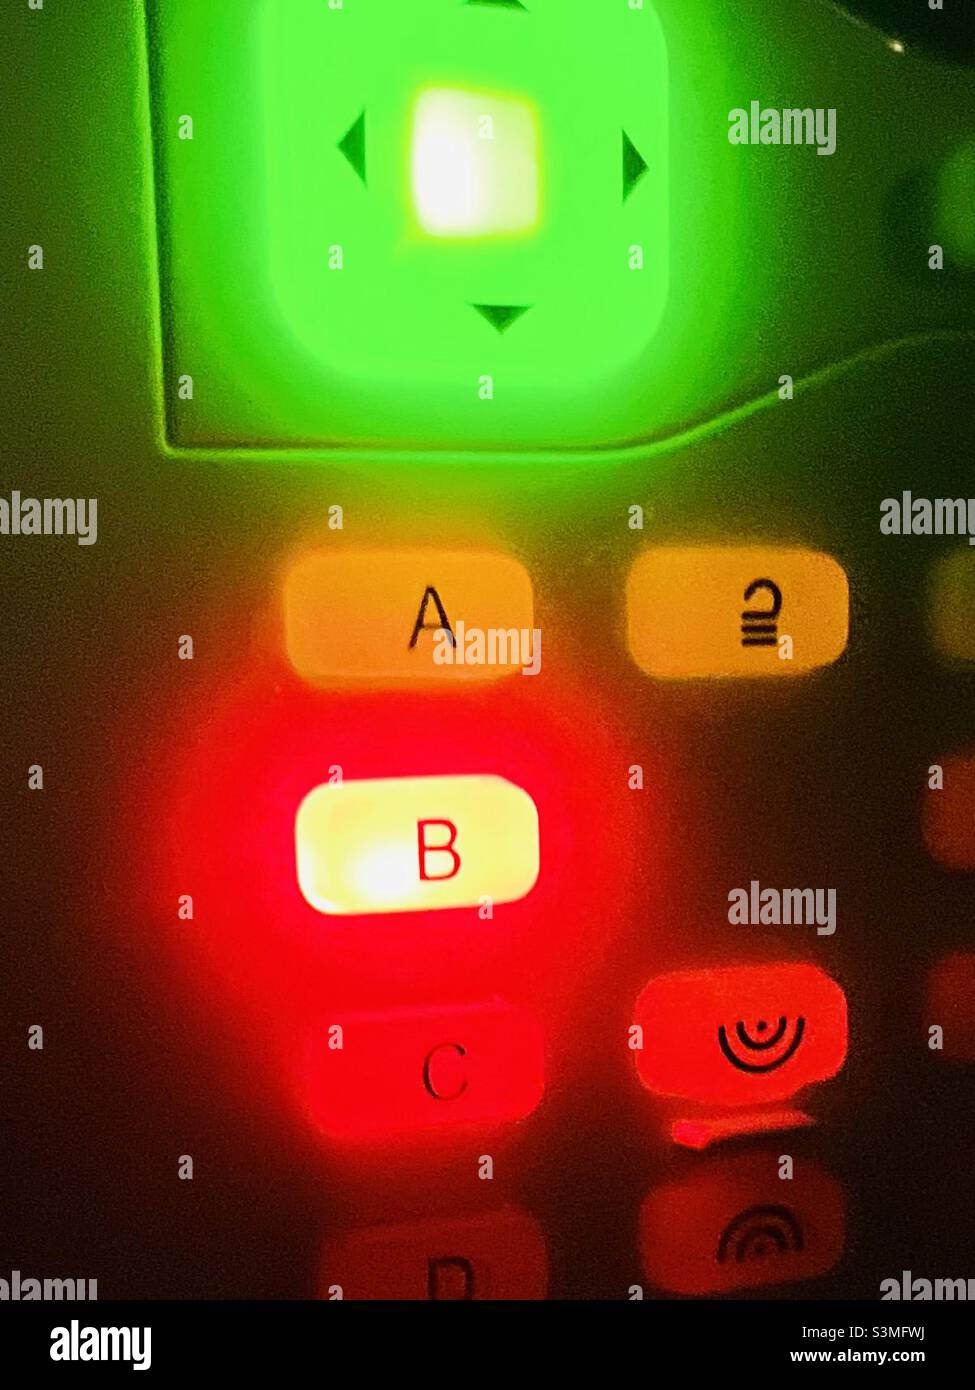 Green orange amber red lights on an alarm system Stock Photo